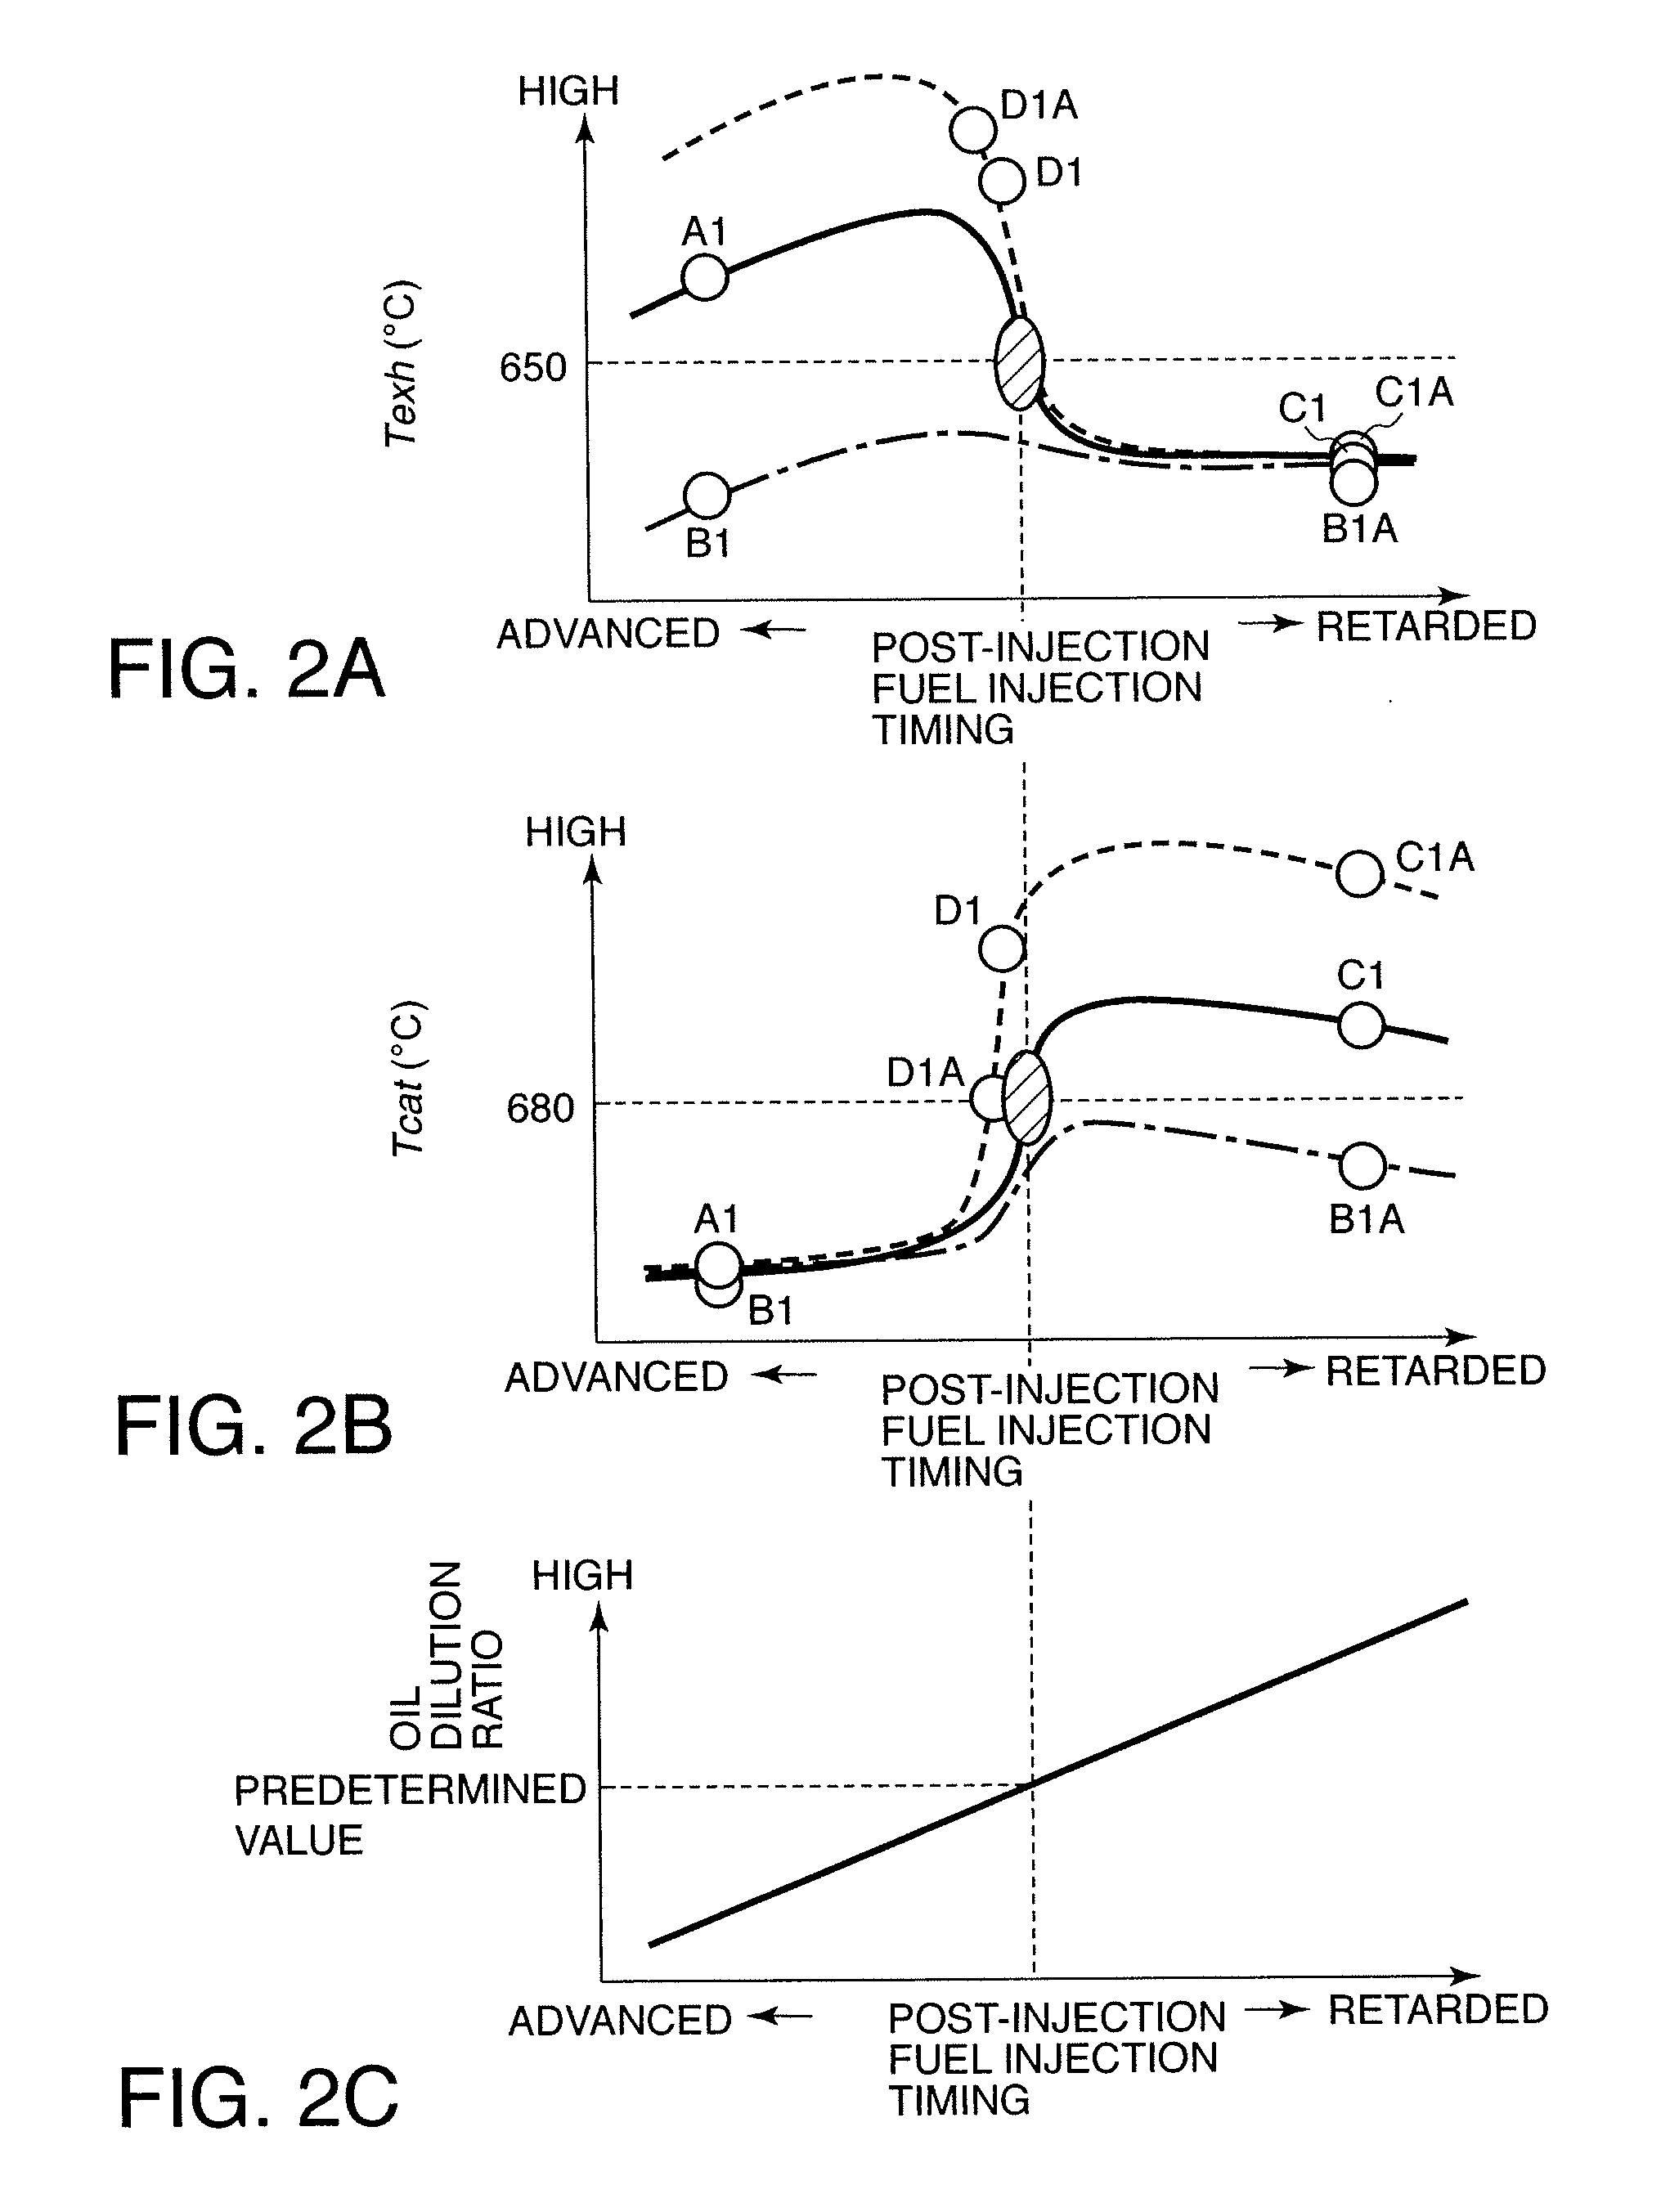 Particulate matter trap filter regeneration temperature control for internal combustion engine